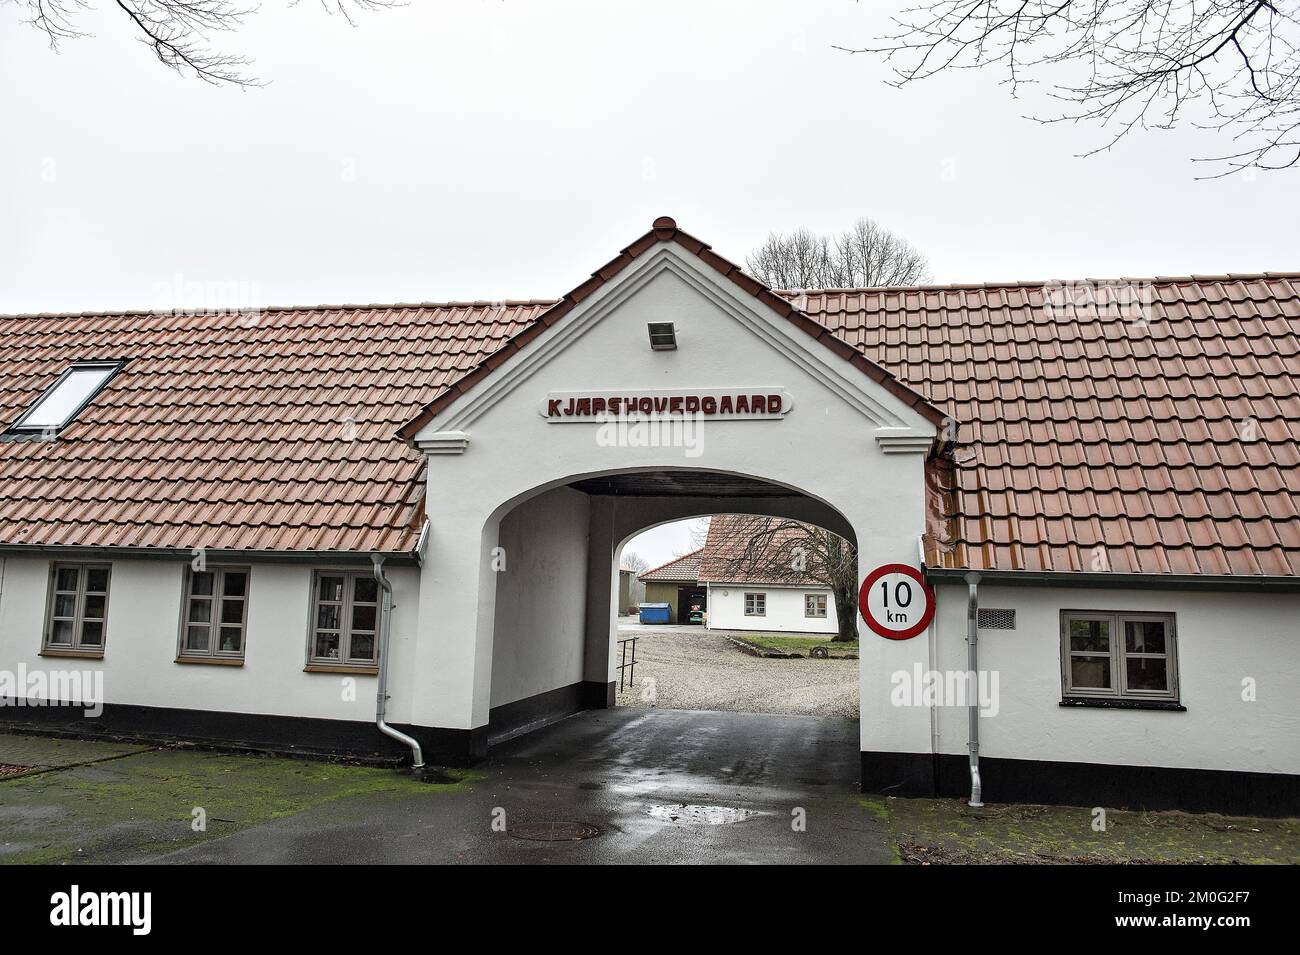 The previously open prison Kaershovedgard outside Ikast, photographed on 27 January 2017. (Photo: Henning Bagger / Scanpix 2018) Stock Photo